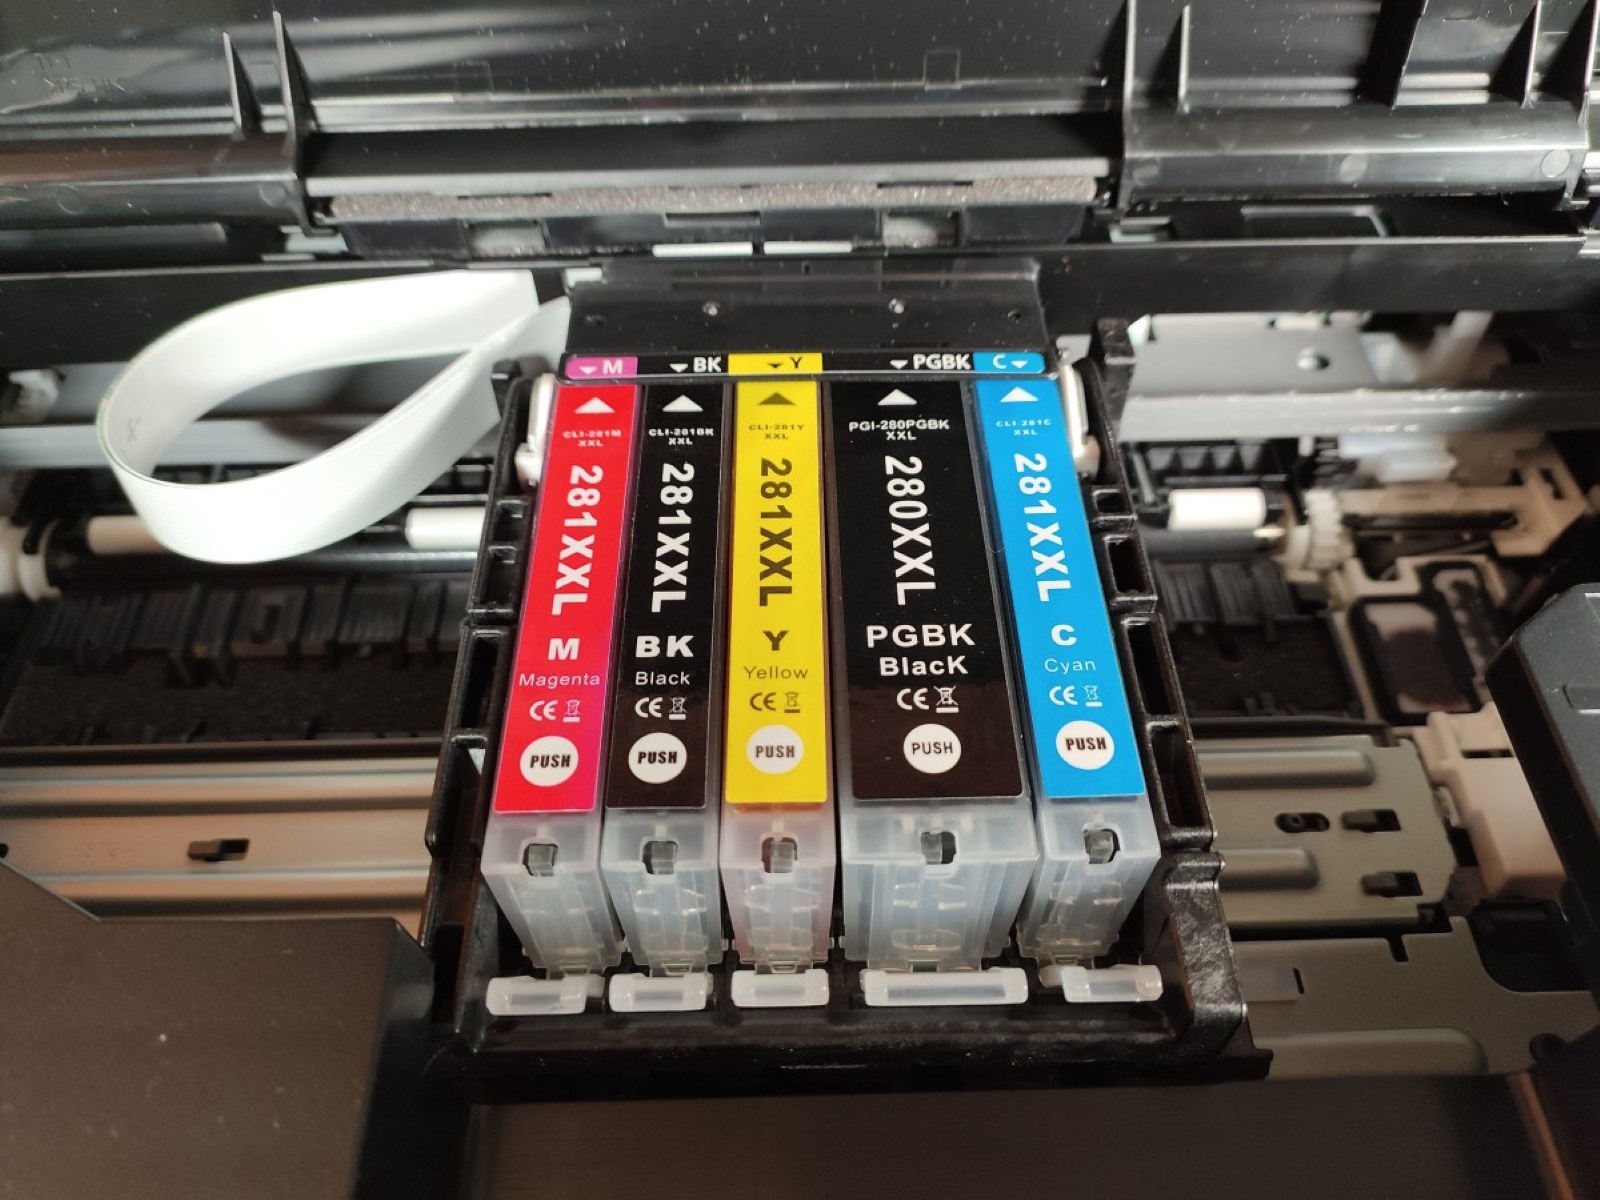 How To Check Ink Levels On HP Printer